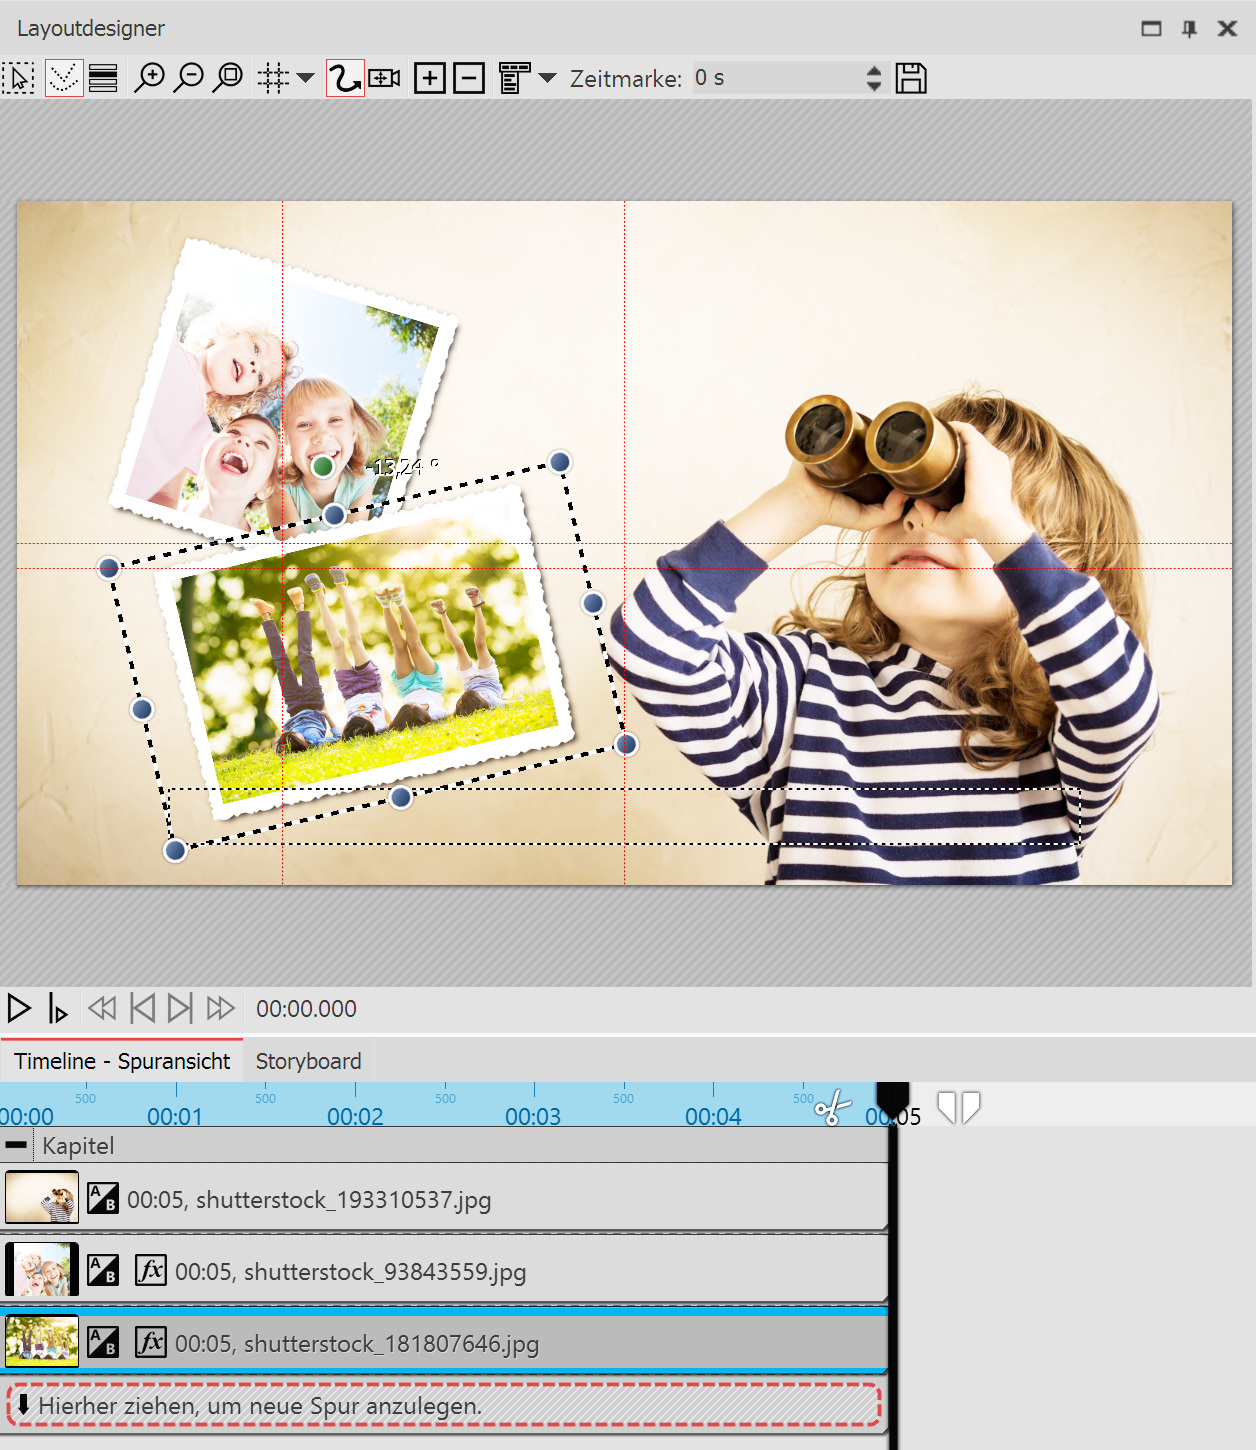 Creating a picture-in-picture effect in the layout designer